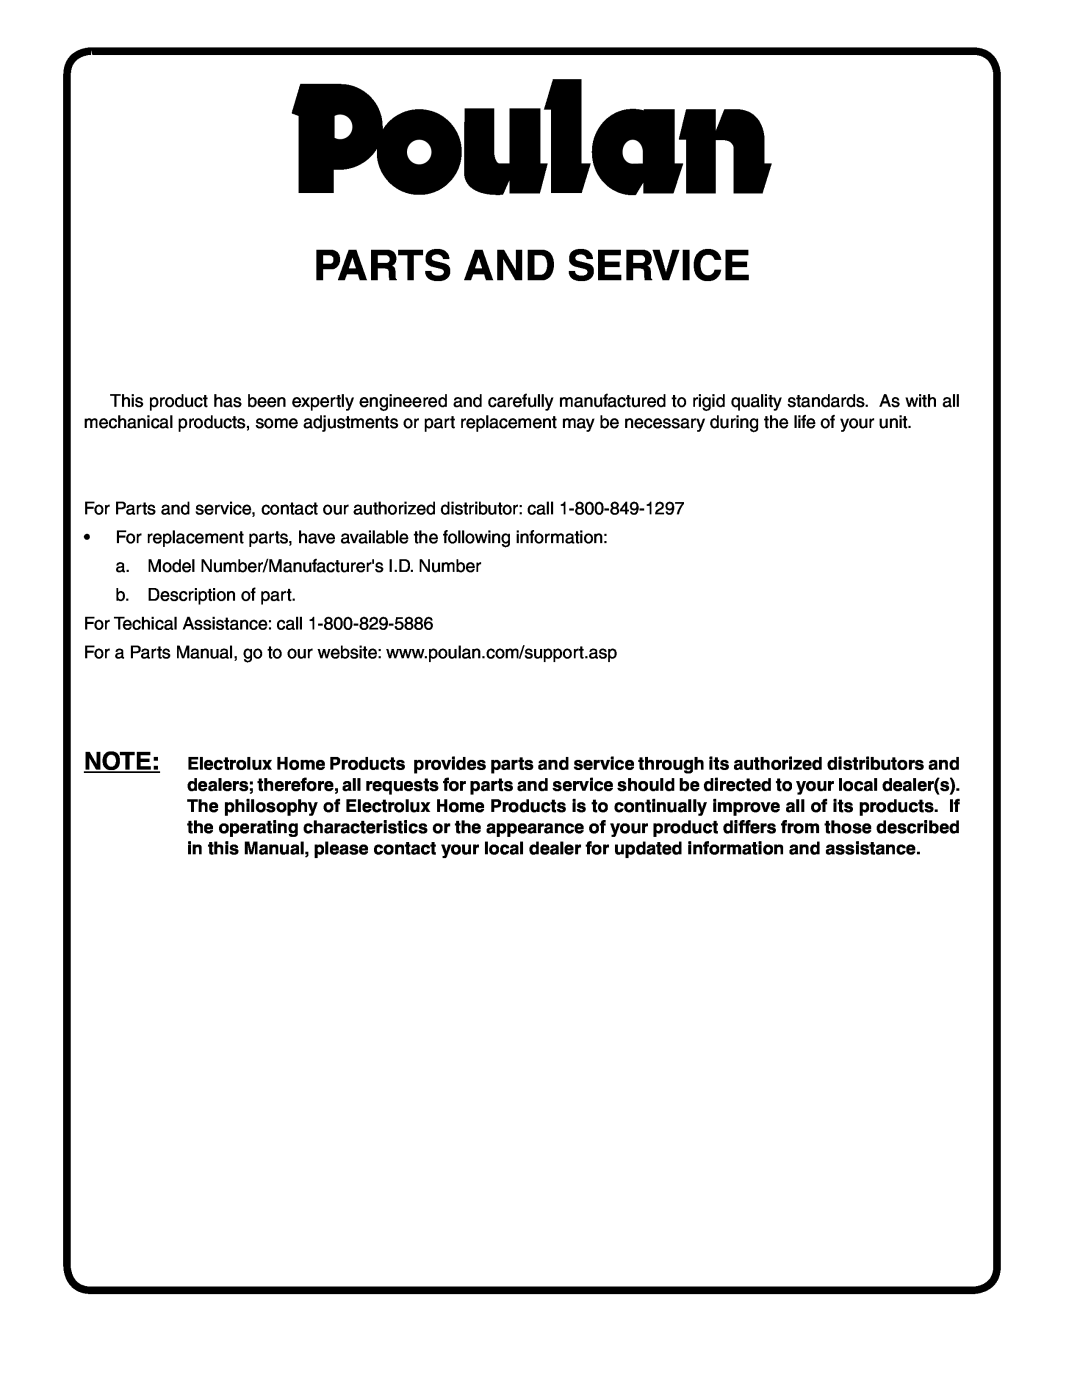 Poulan 96012004400, 401152 manual Parts And Service 